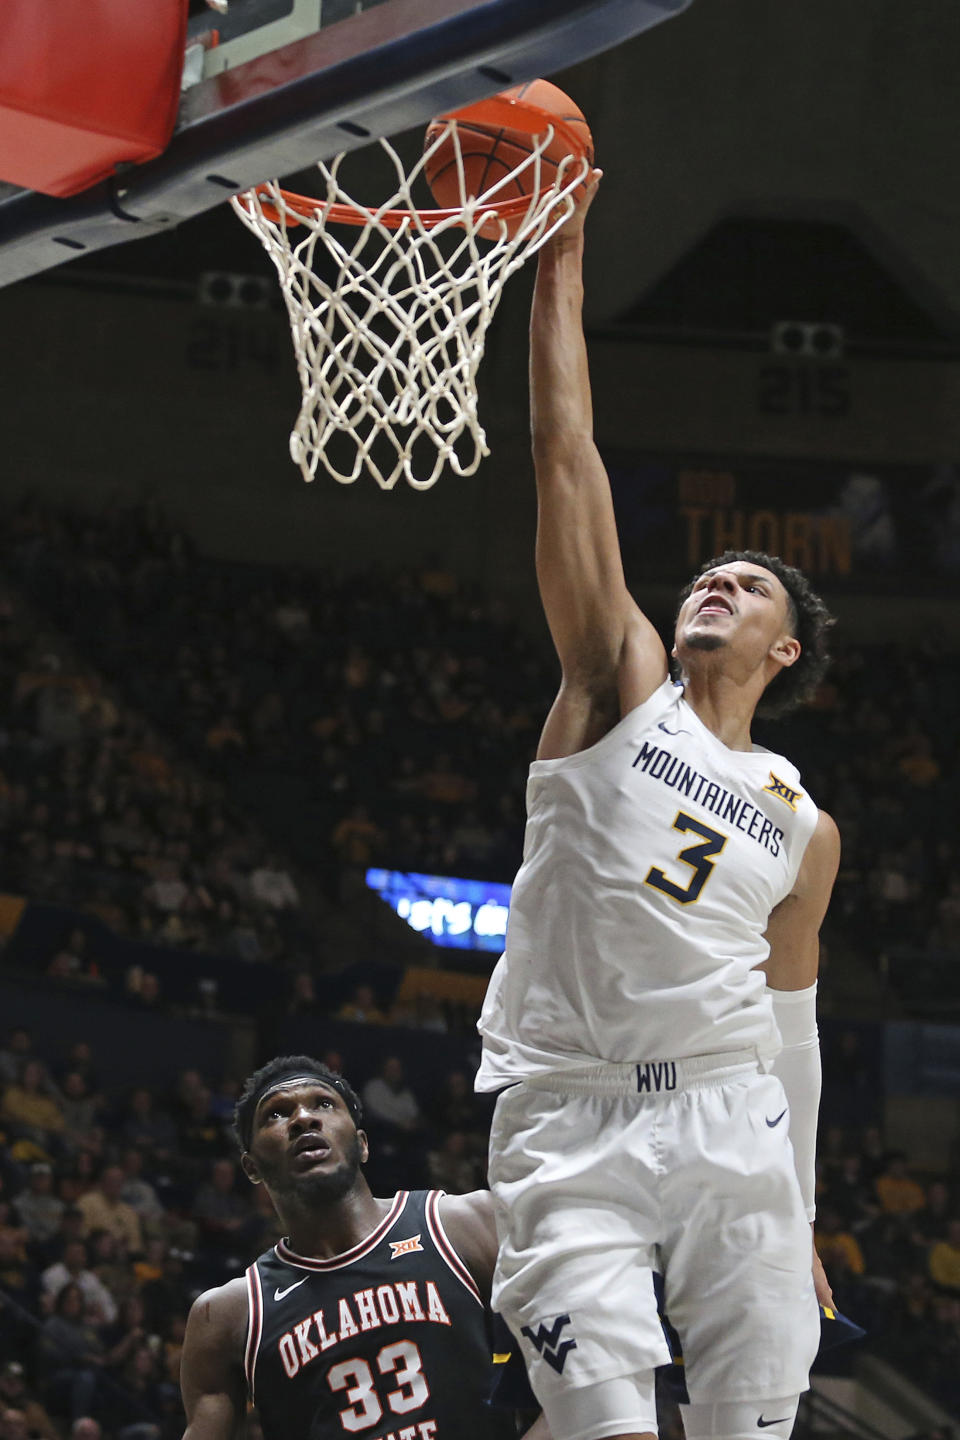 West Virginia forward Tre Mitchell (3) shoots while Oklahoma State forward Moussa Cisse (33) defends during the second half of an NCAA college basketball game on Monday, Feb. 20, 2023, in Morgantown, W.Va. (AP Photo/Kathleen Batten)